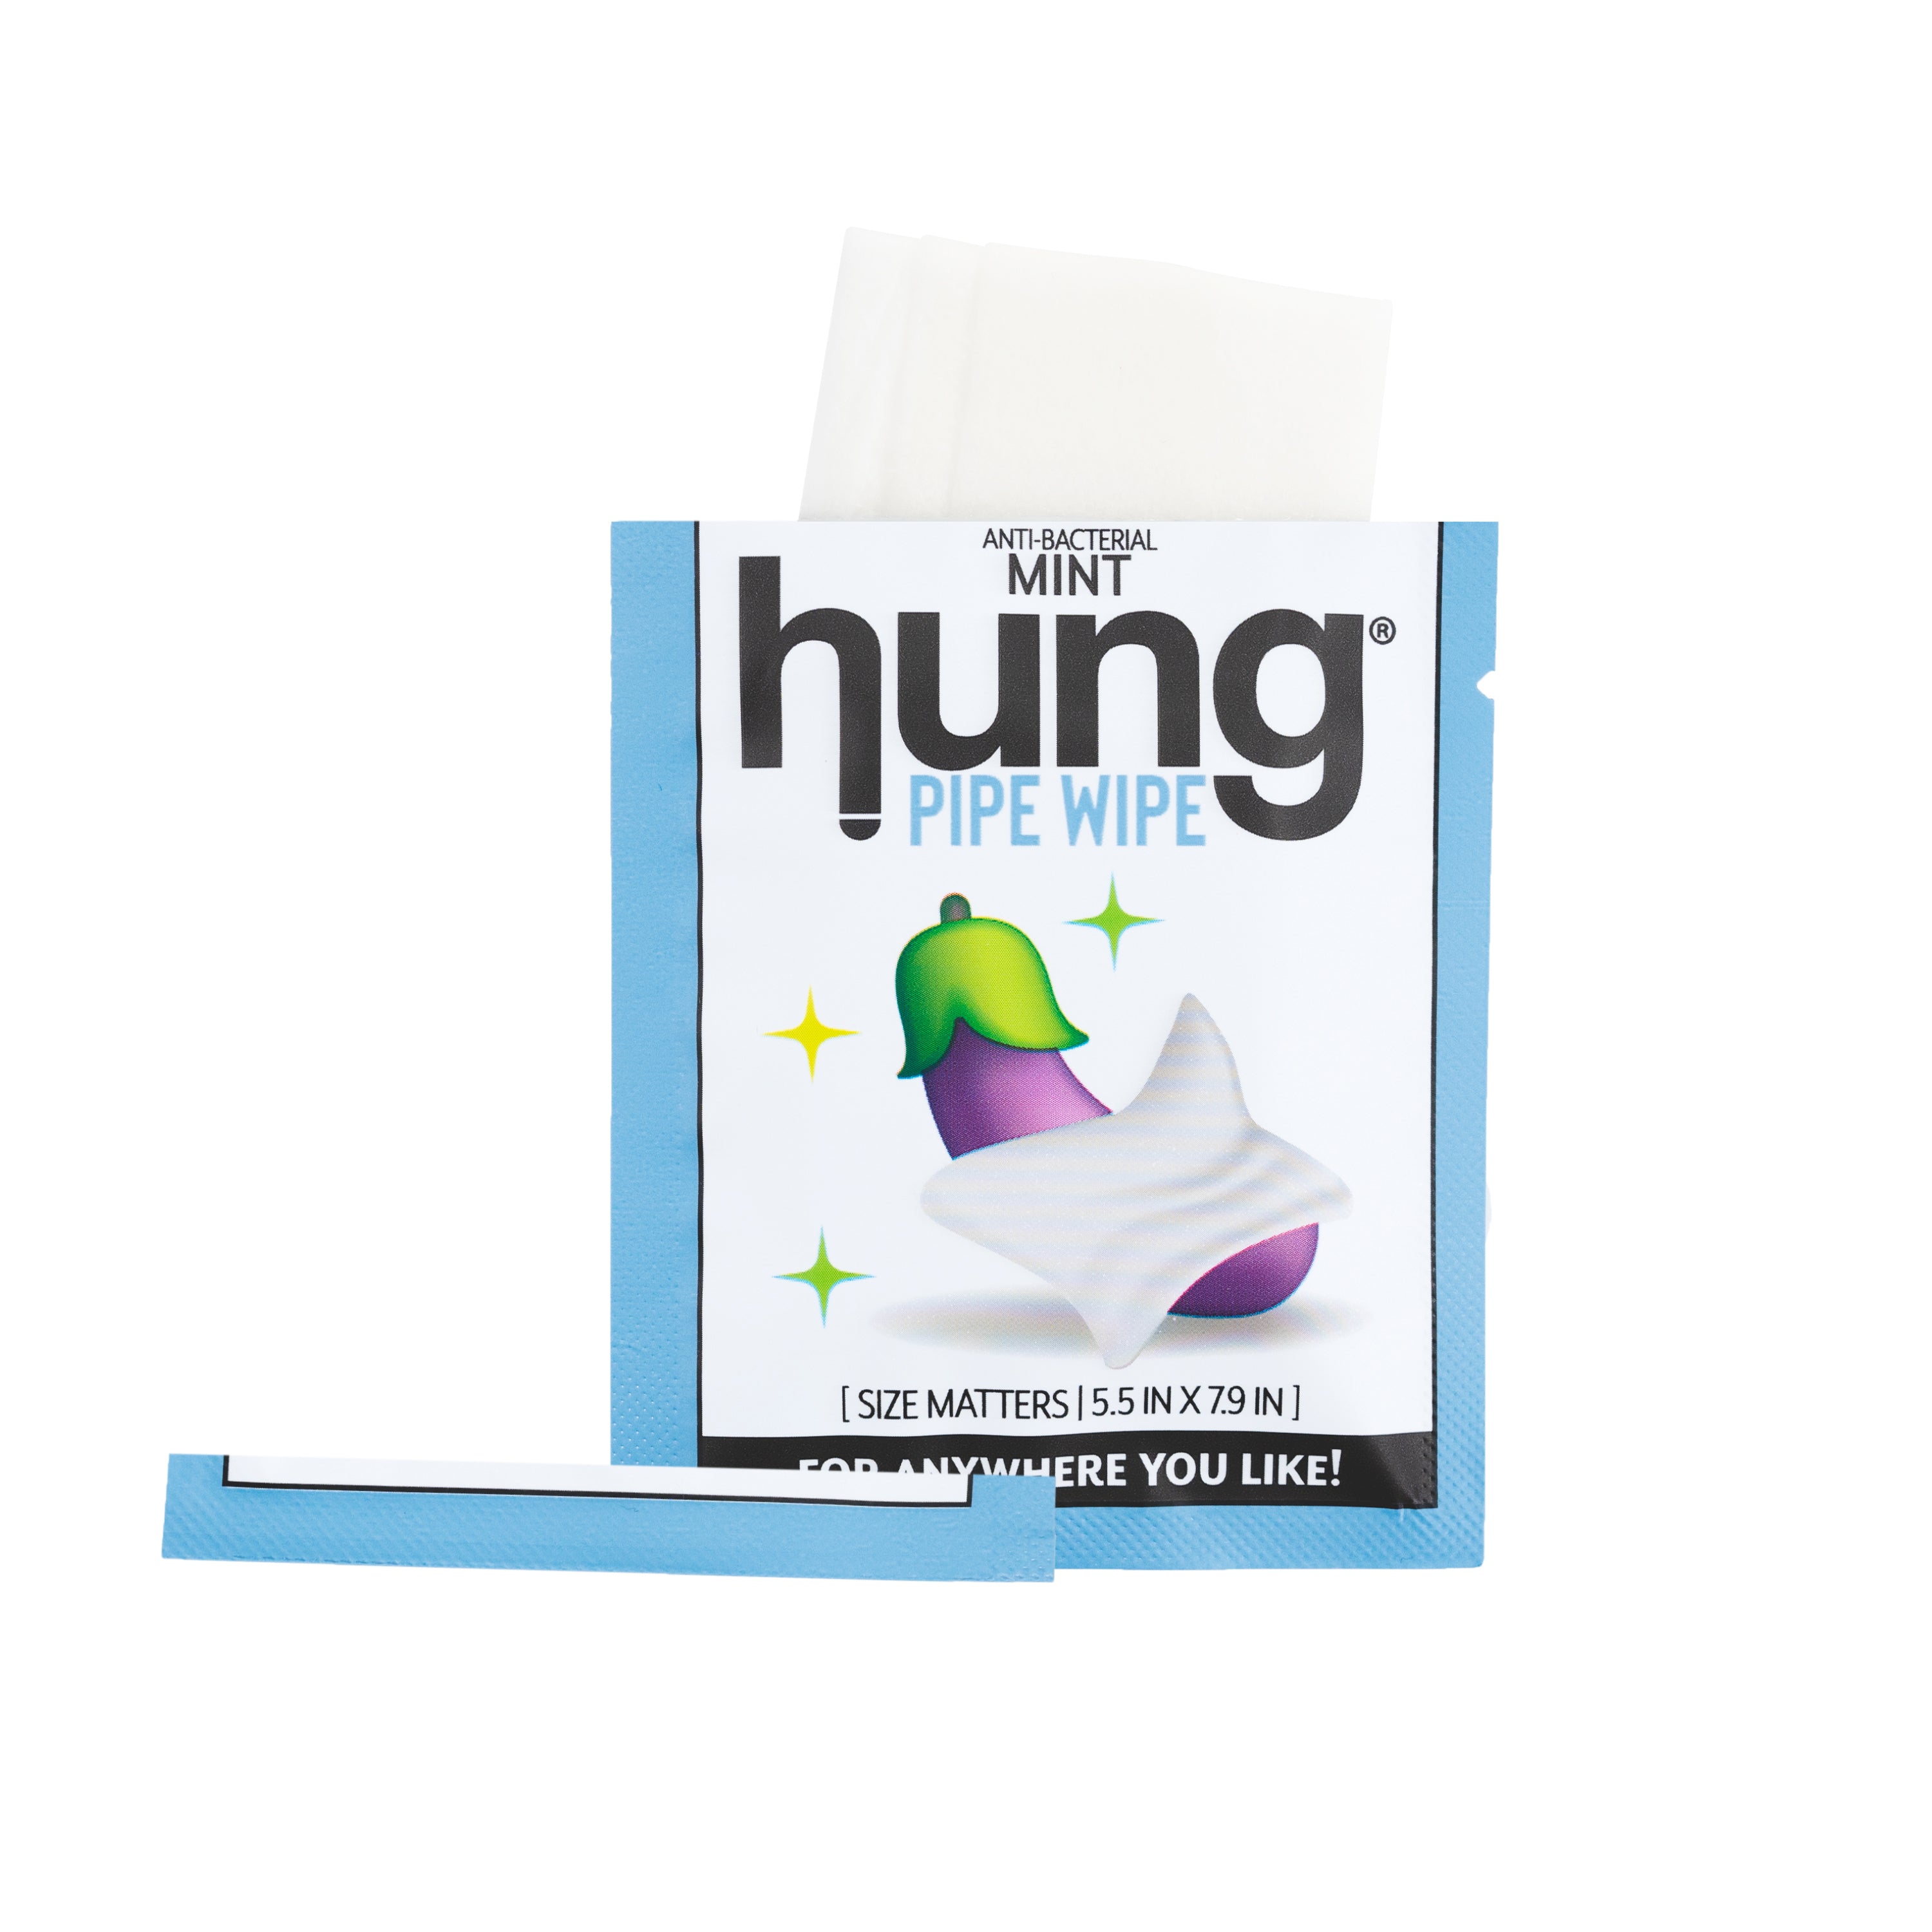 Hung Pipe Wipe Single Packet with Torn Top |  Male Hygiene for Anywhere You Like 